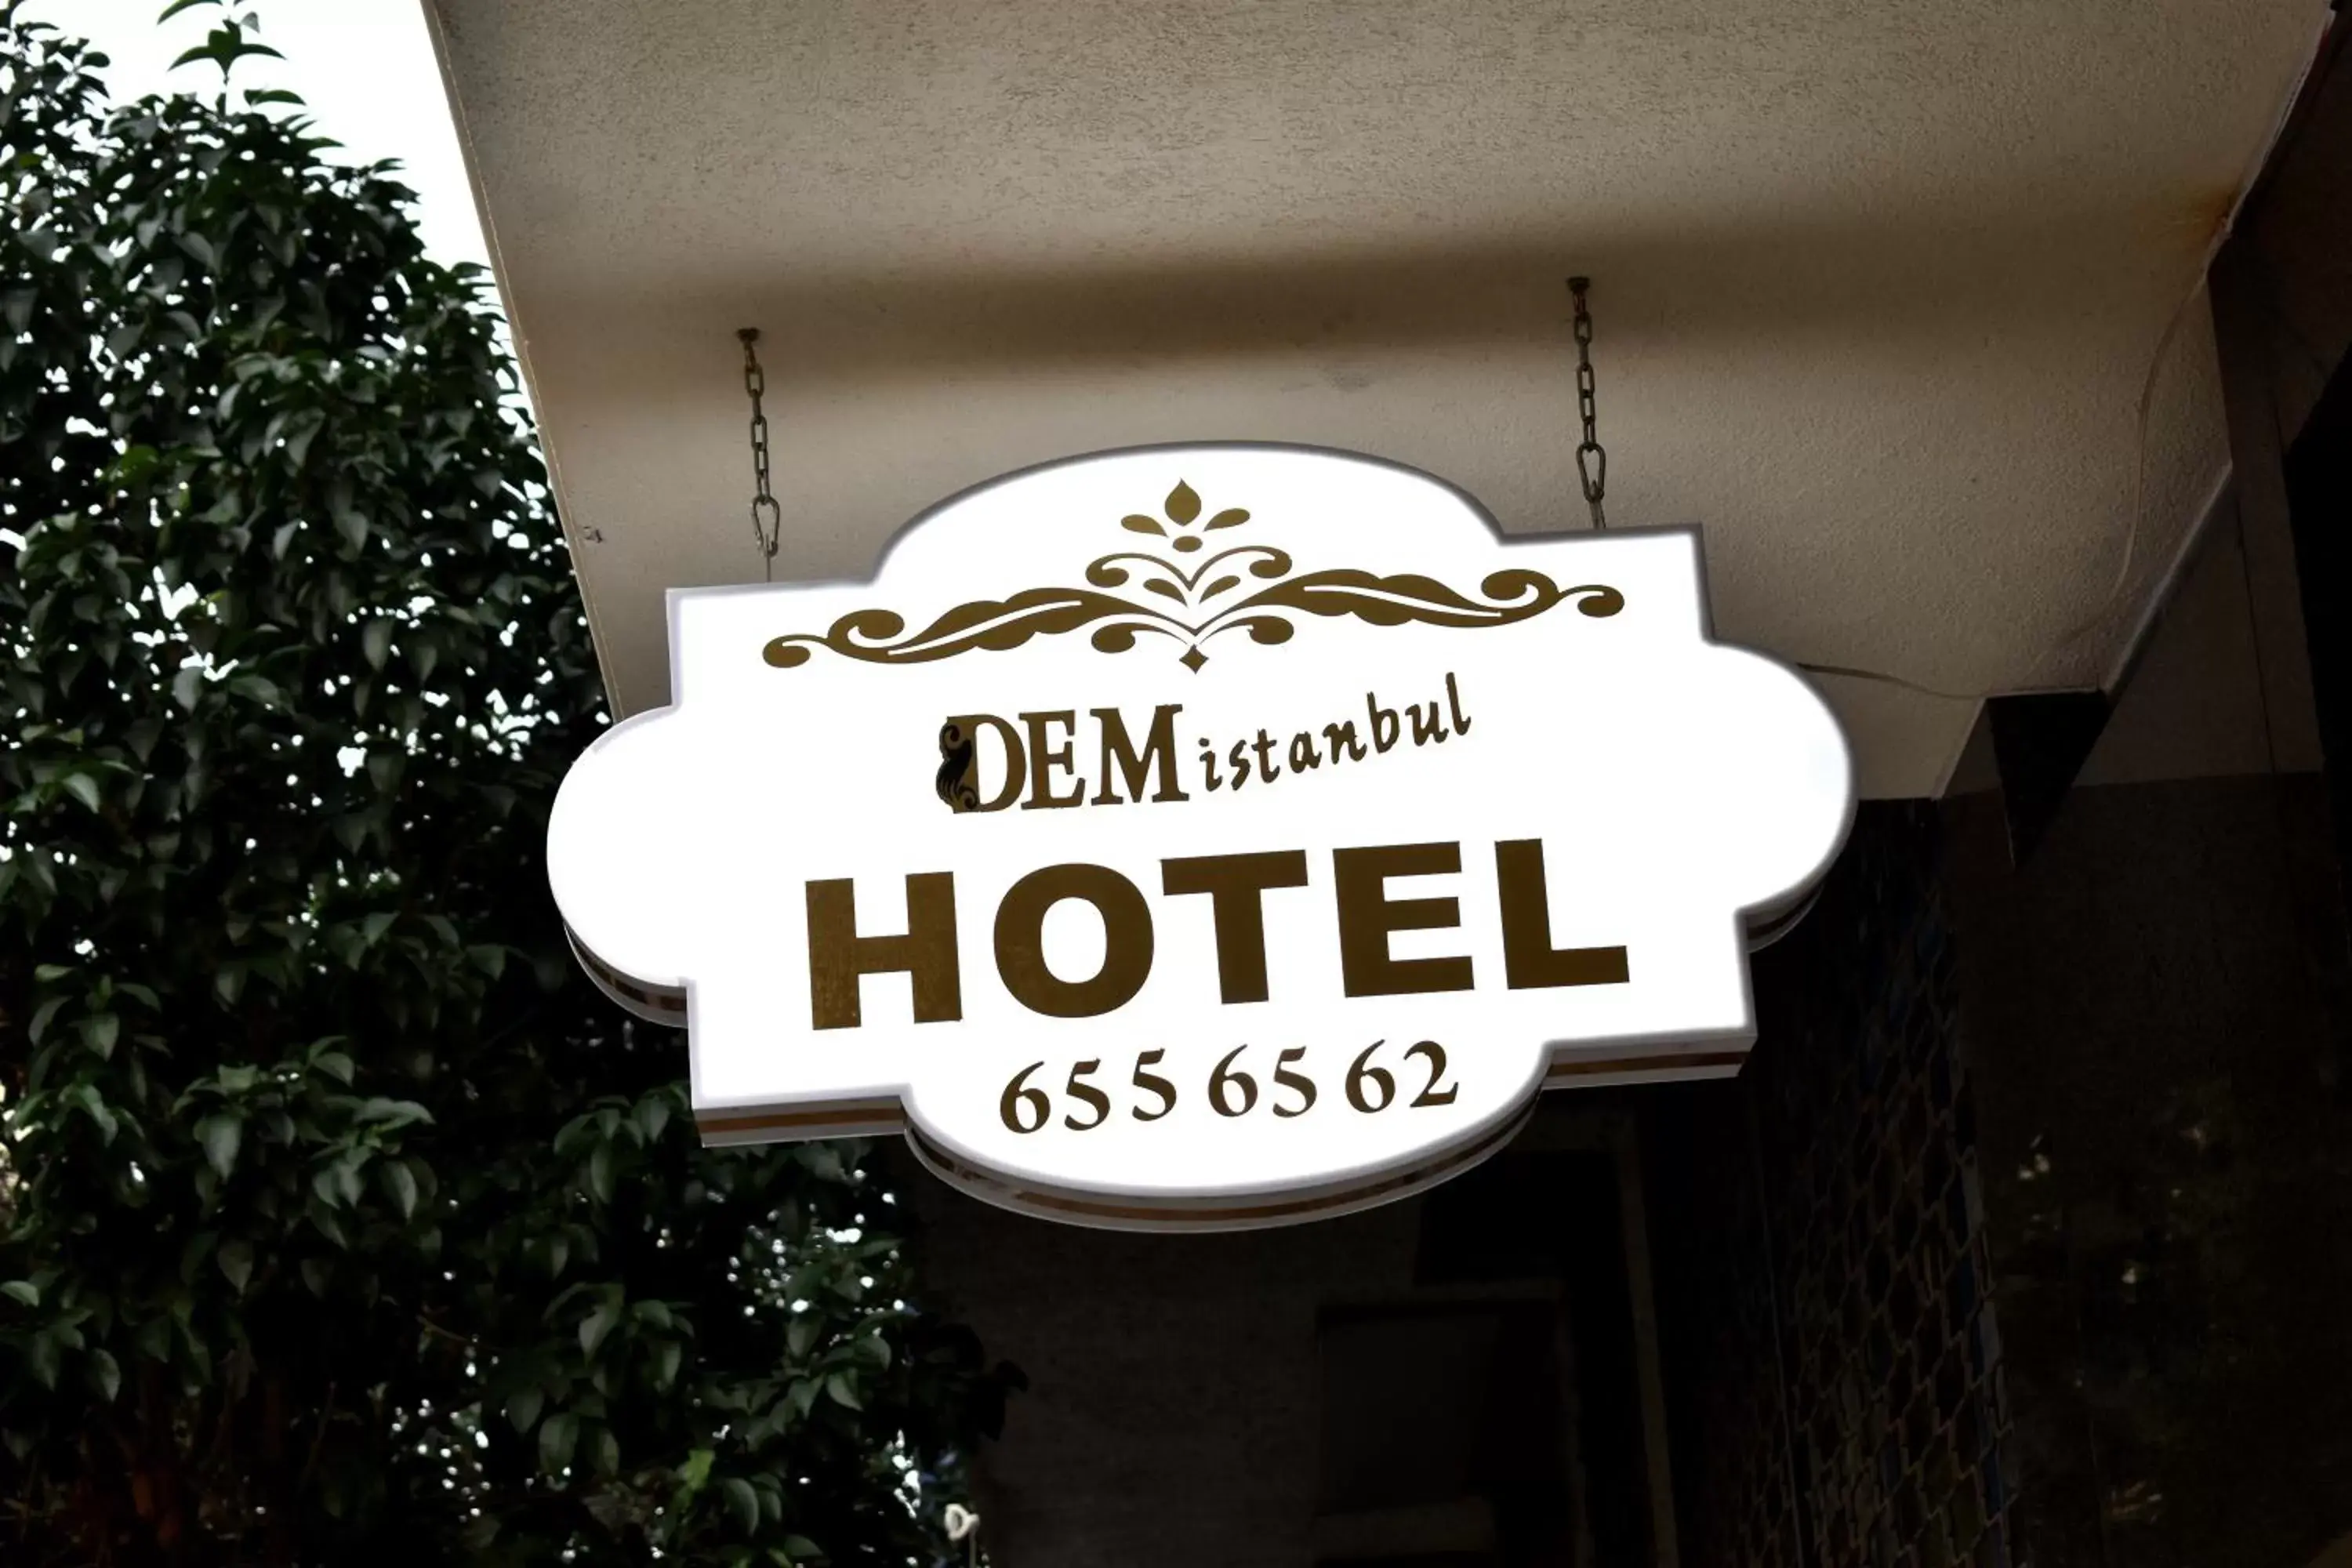 Property logo or sign in Dem İstanbul Airport Hotel